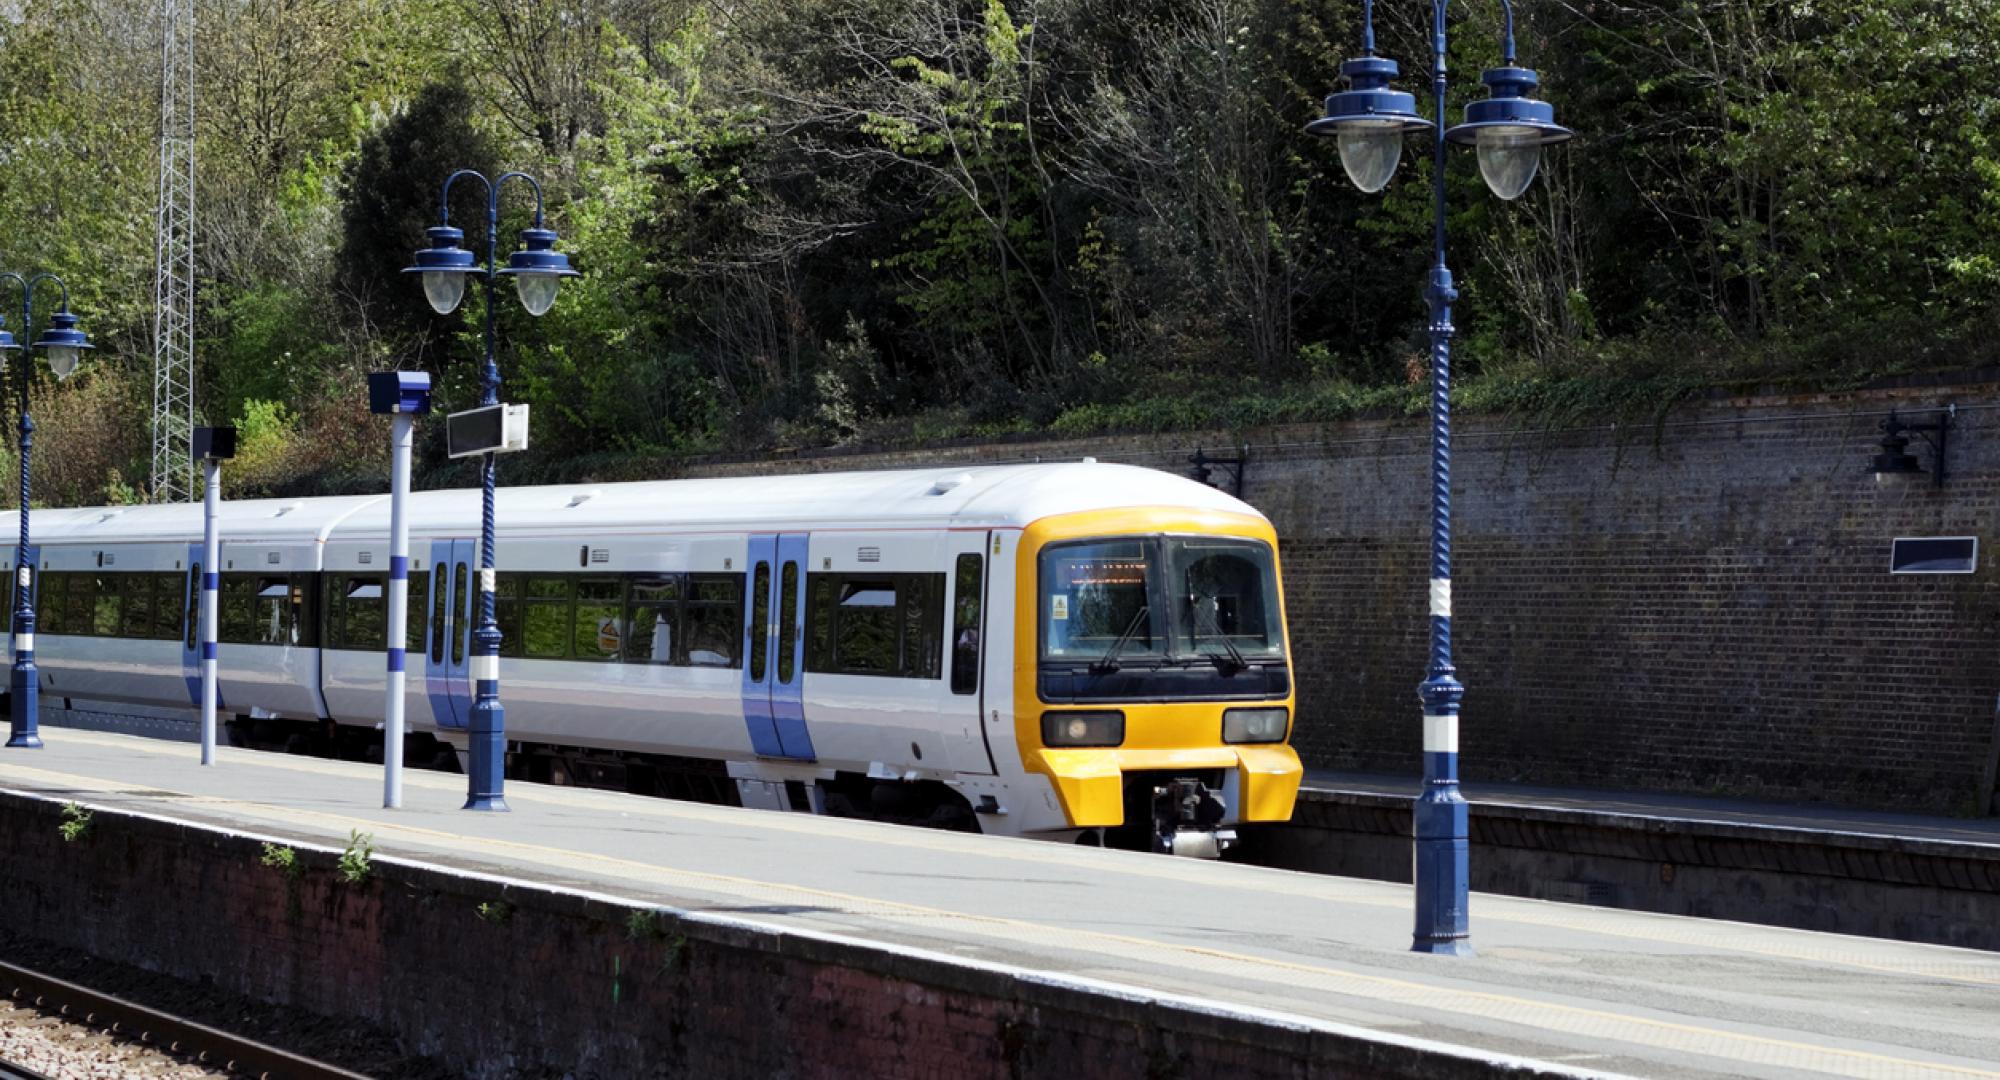 An electricity-powered passenger train entering a London suburban station on a bright and sunny April day.